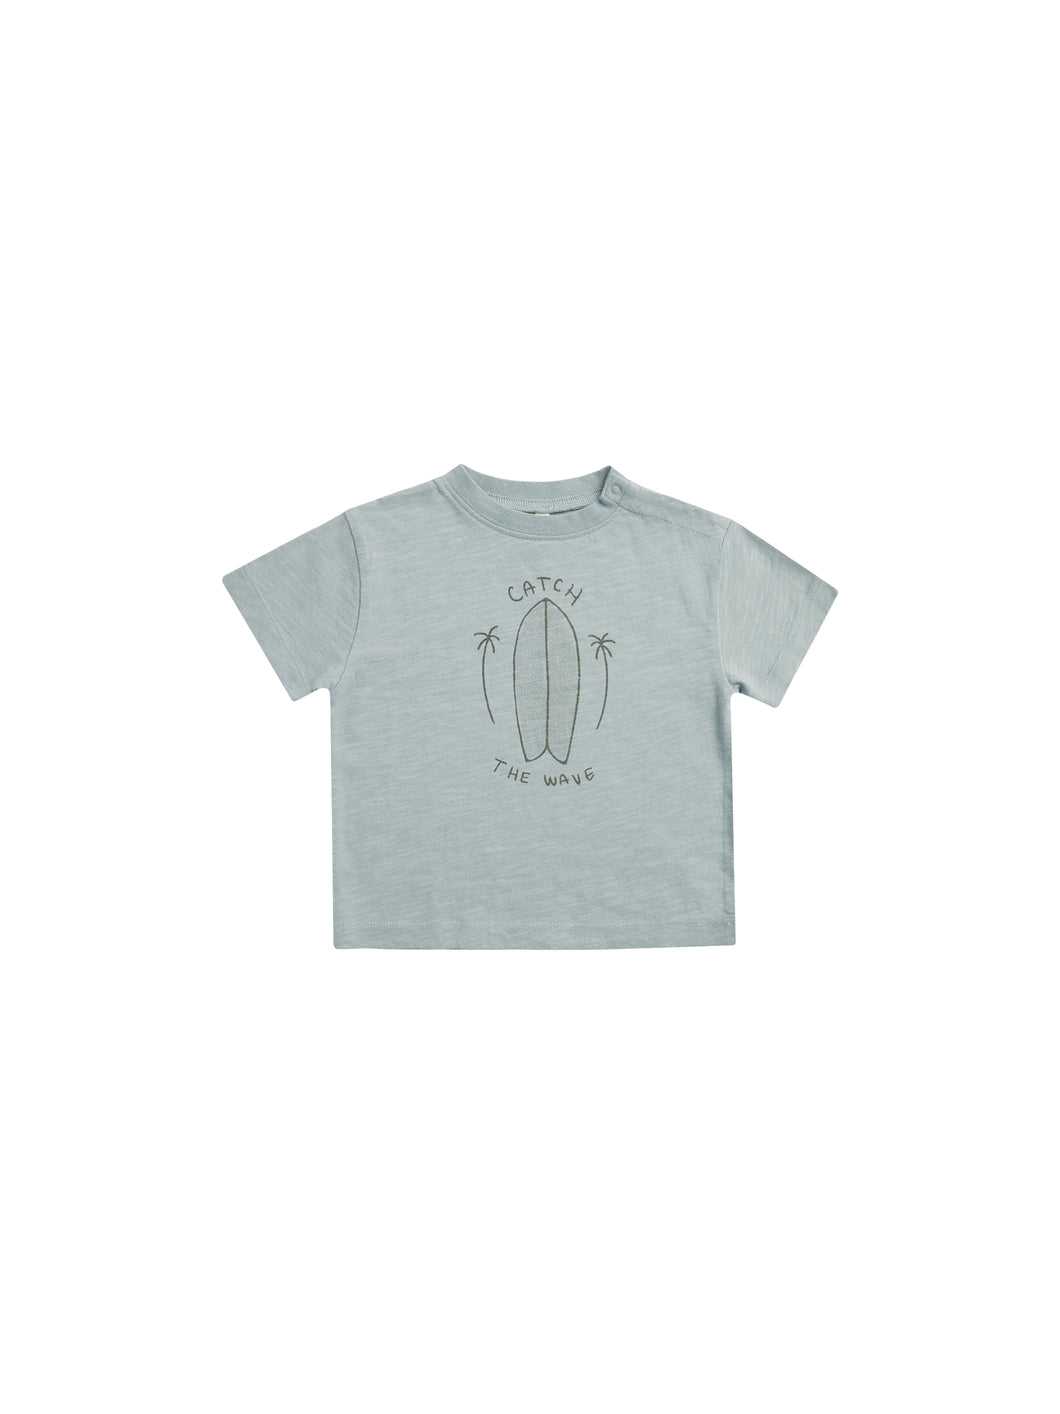 Cotton children's tee featuring a blue colour and a surfboard graphic